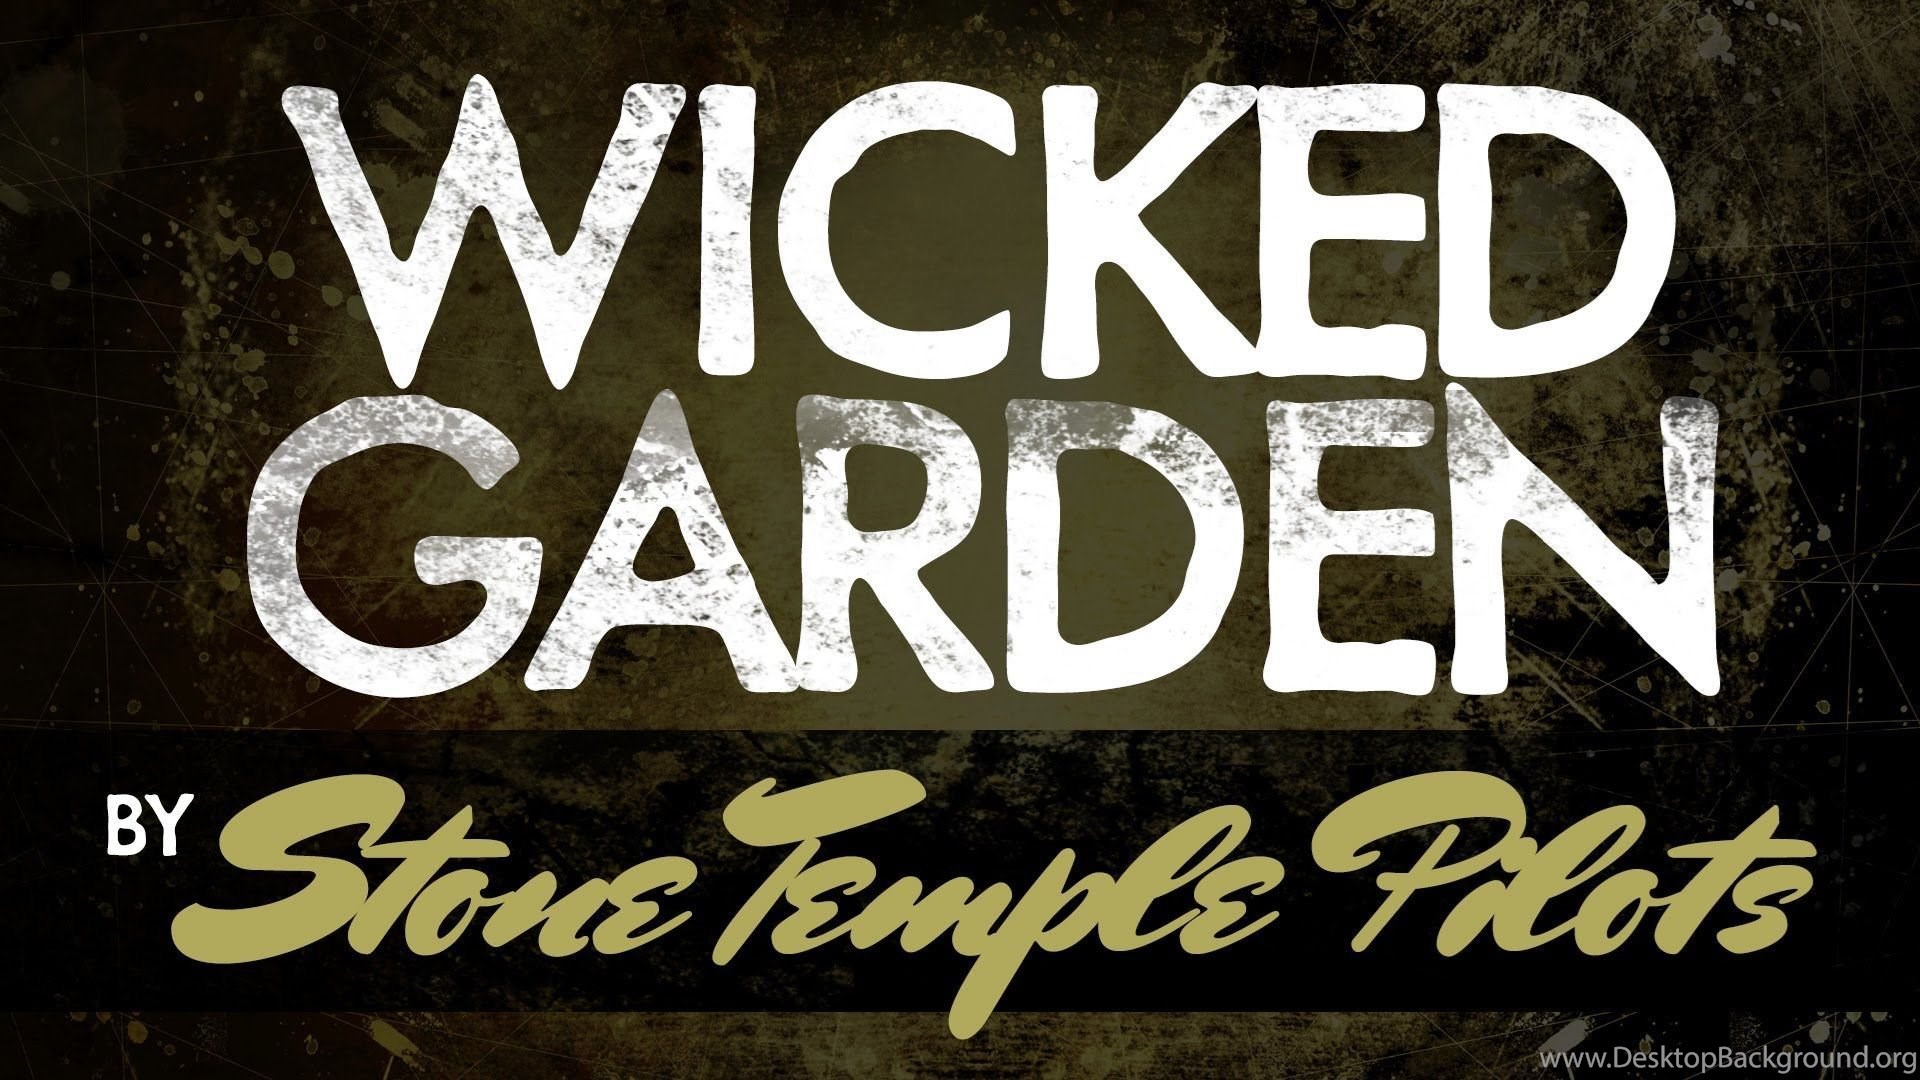 Stone Temple Pilots Wicked Garden Cover Youtube Desktop Background